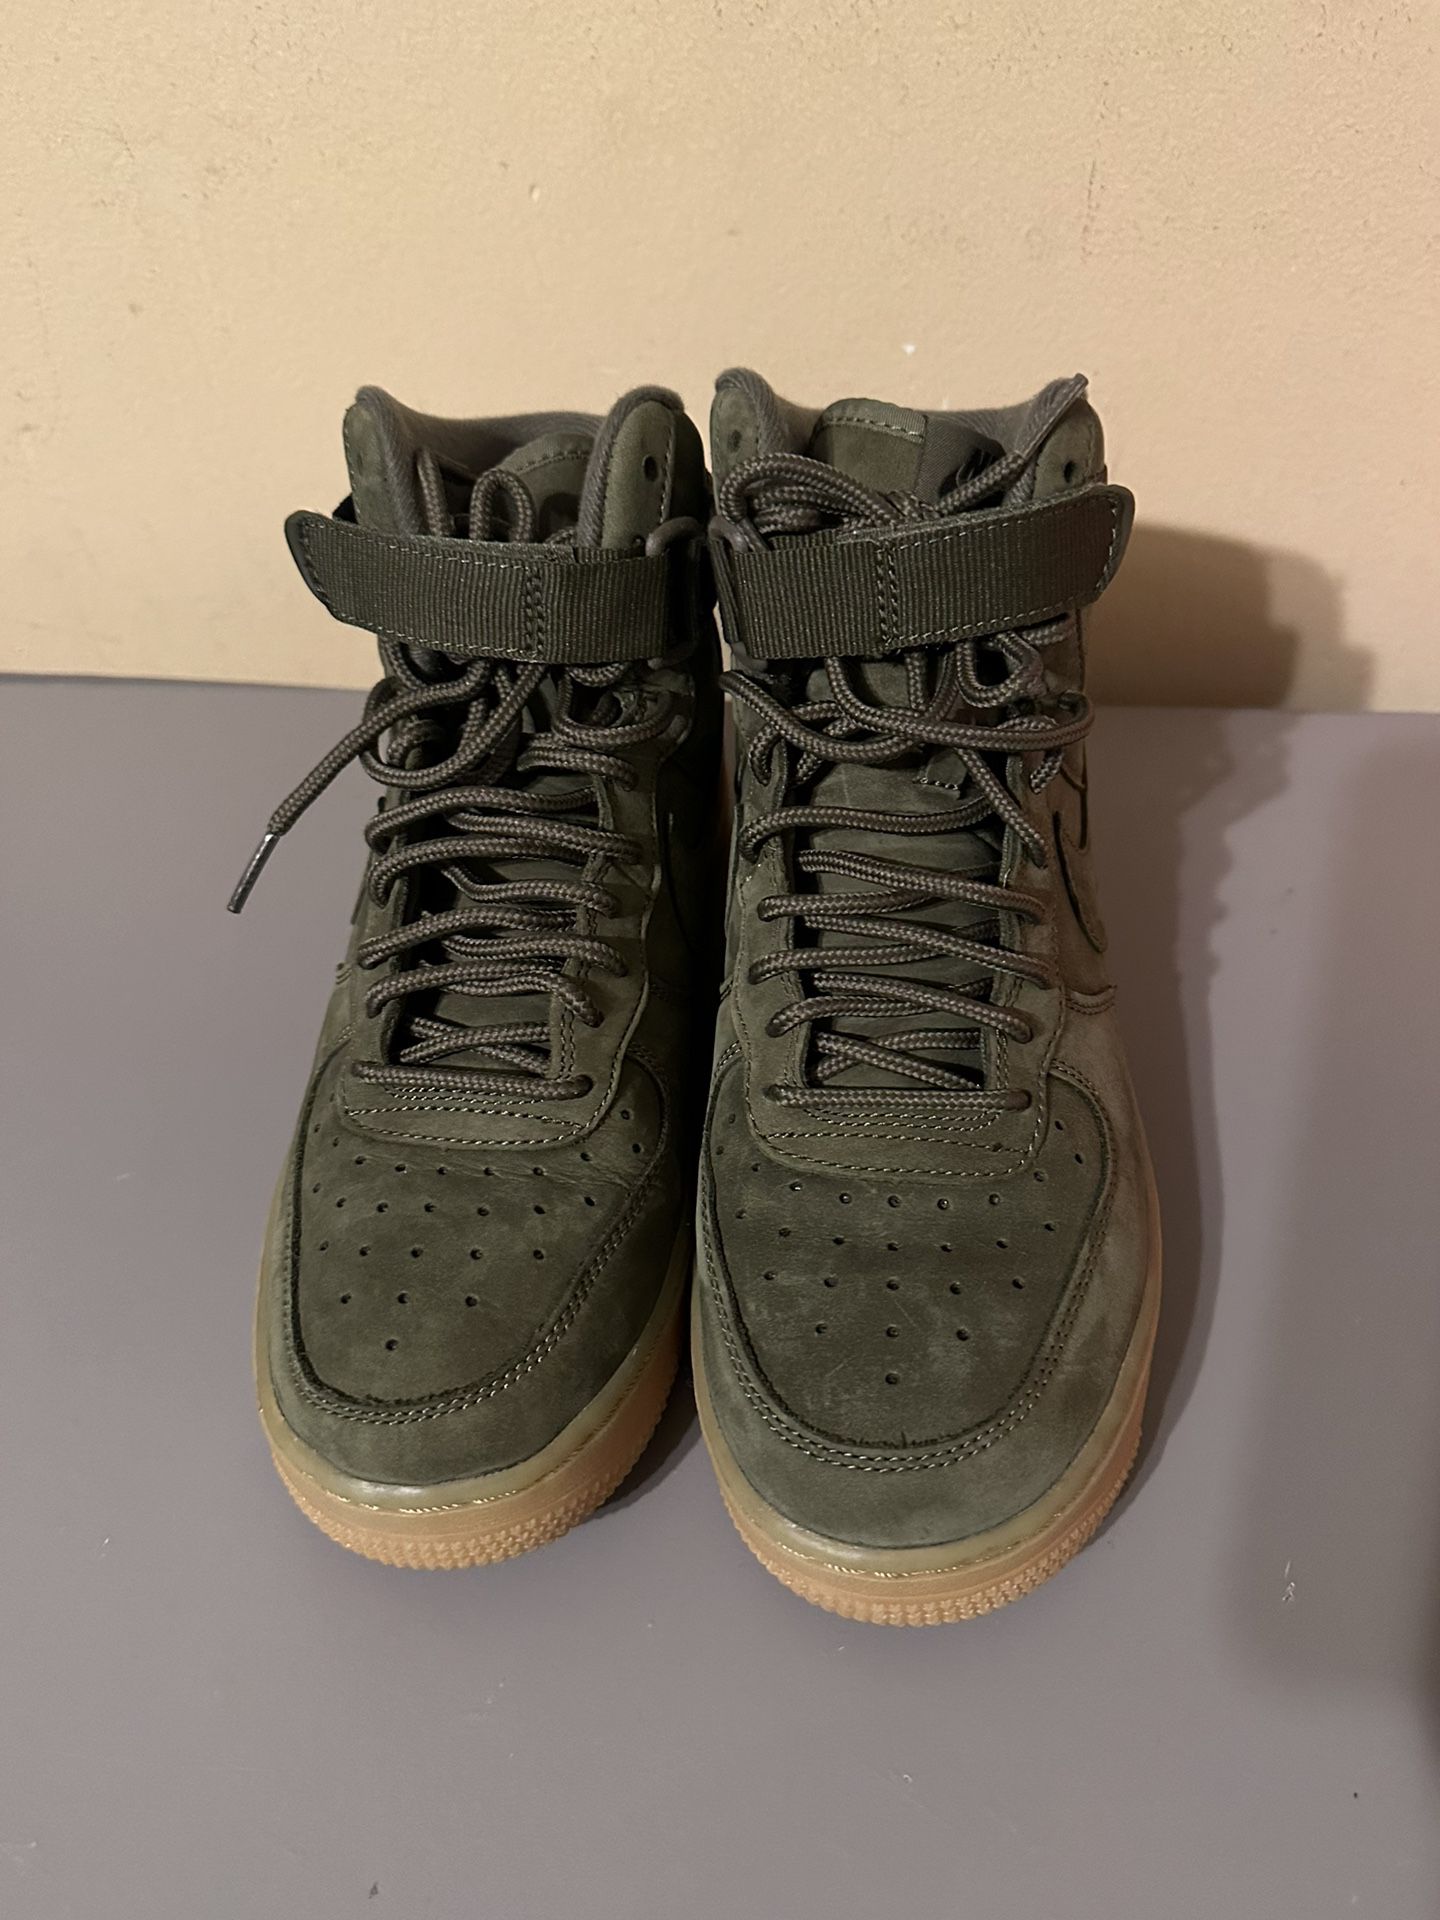 Nike Air Force 1 High Wb (gs) Medium Olive/ Medium Olive in Green for Men